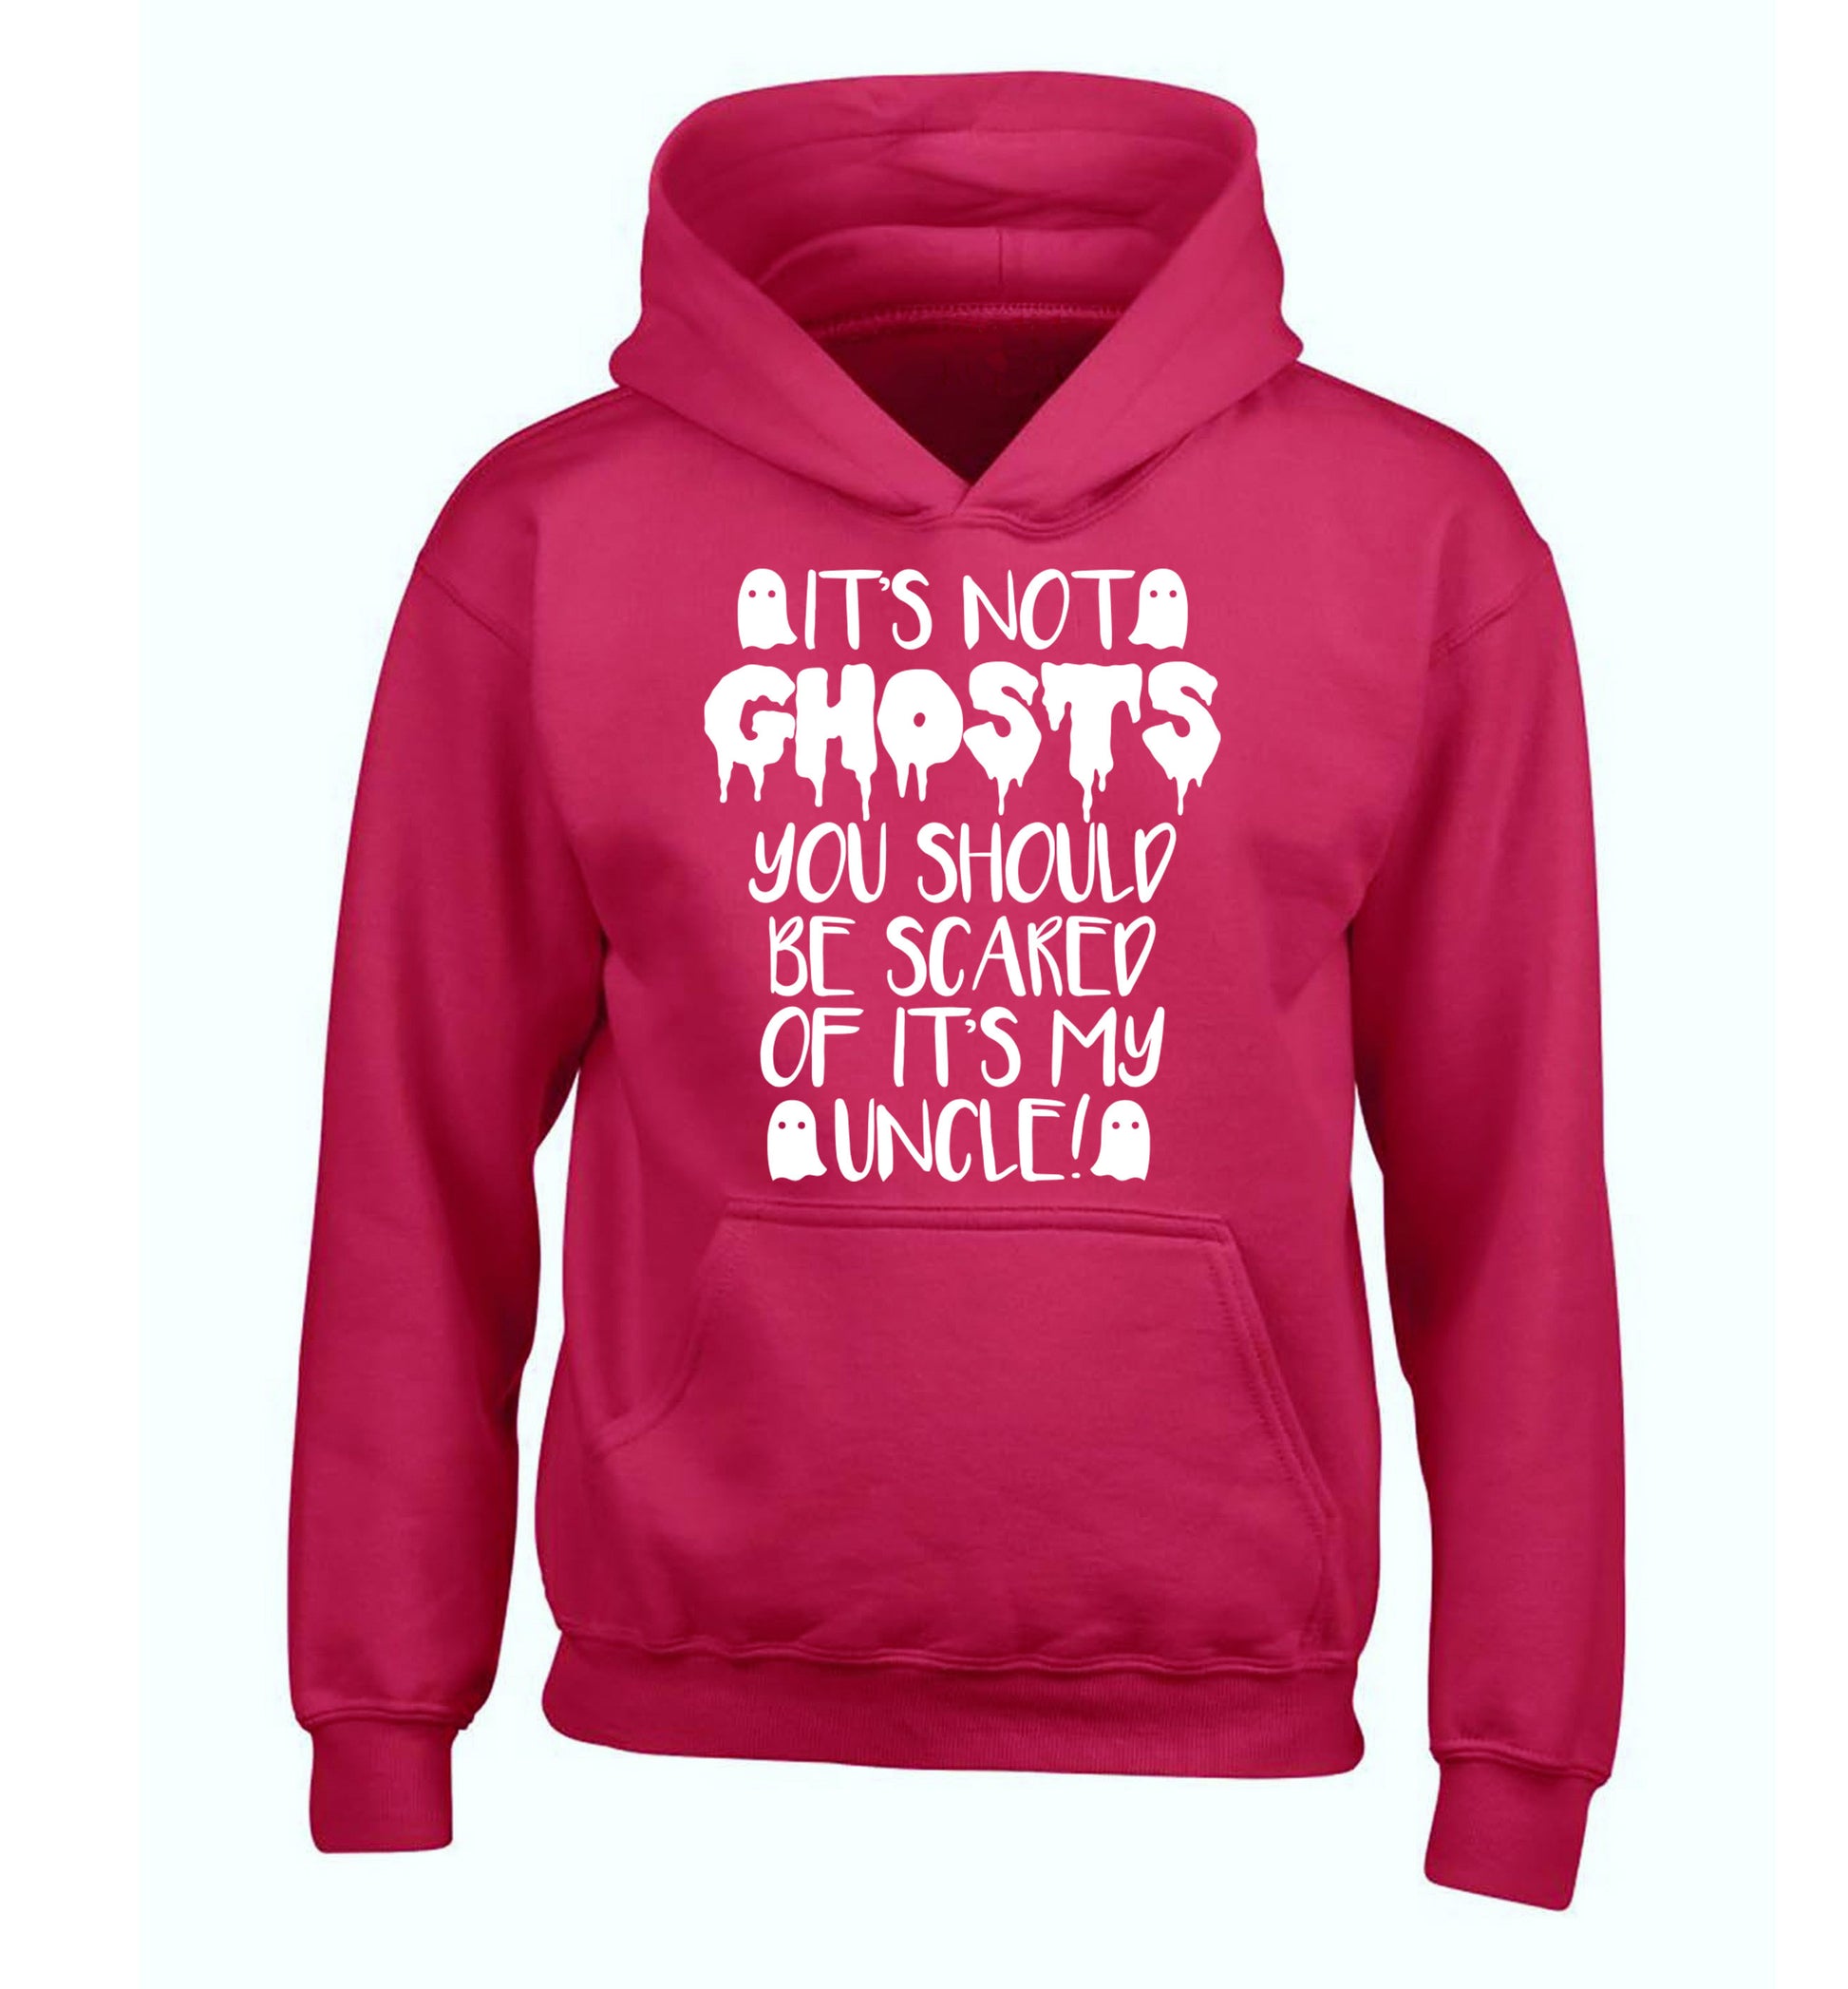 It's not ghosts you should be scared of it's my uncle! children's pink hoodie 12-14 Years